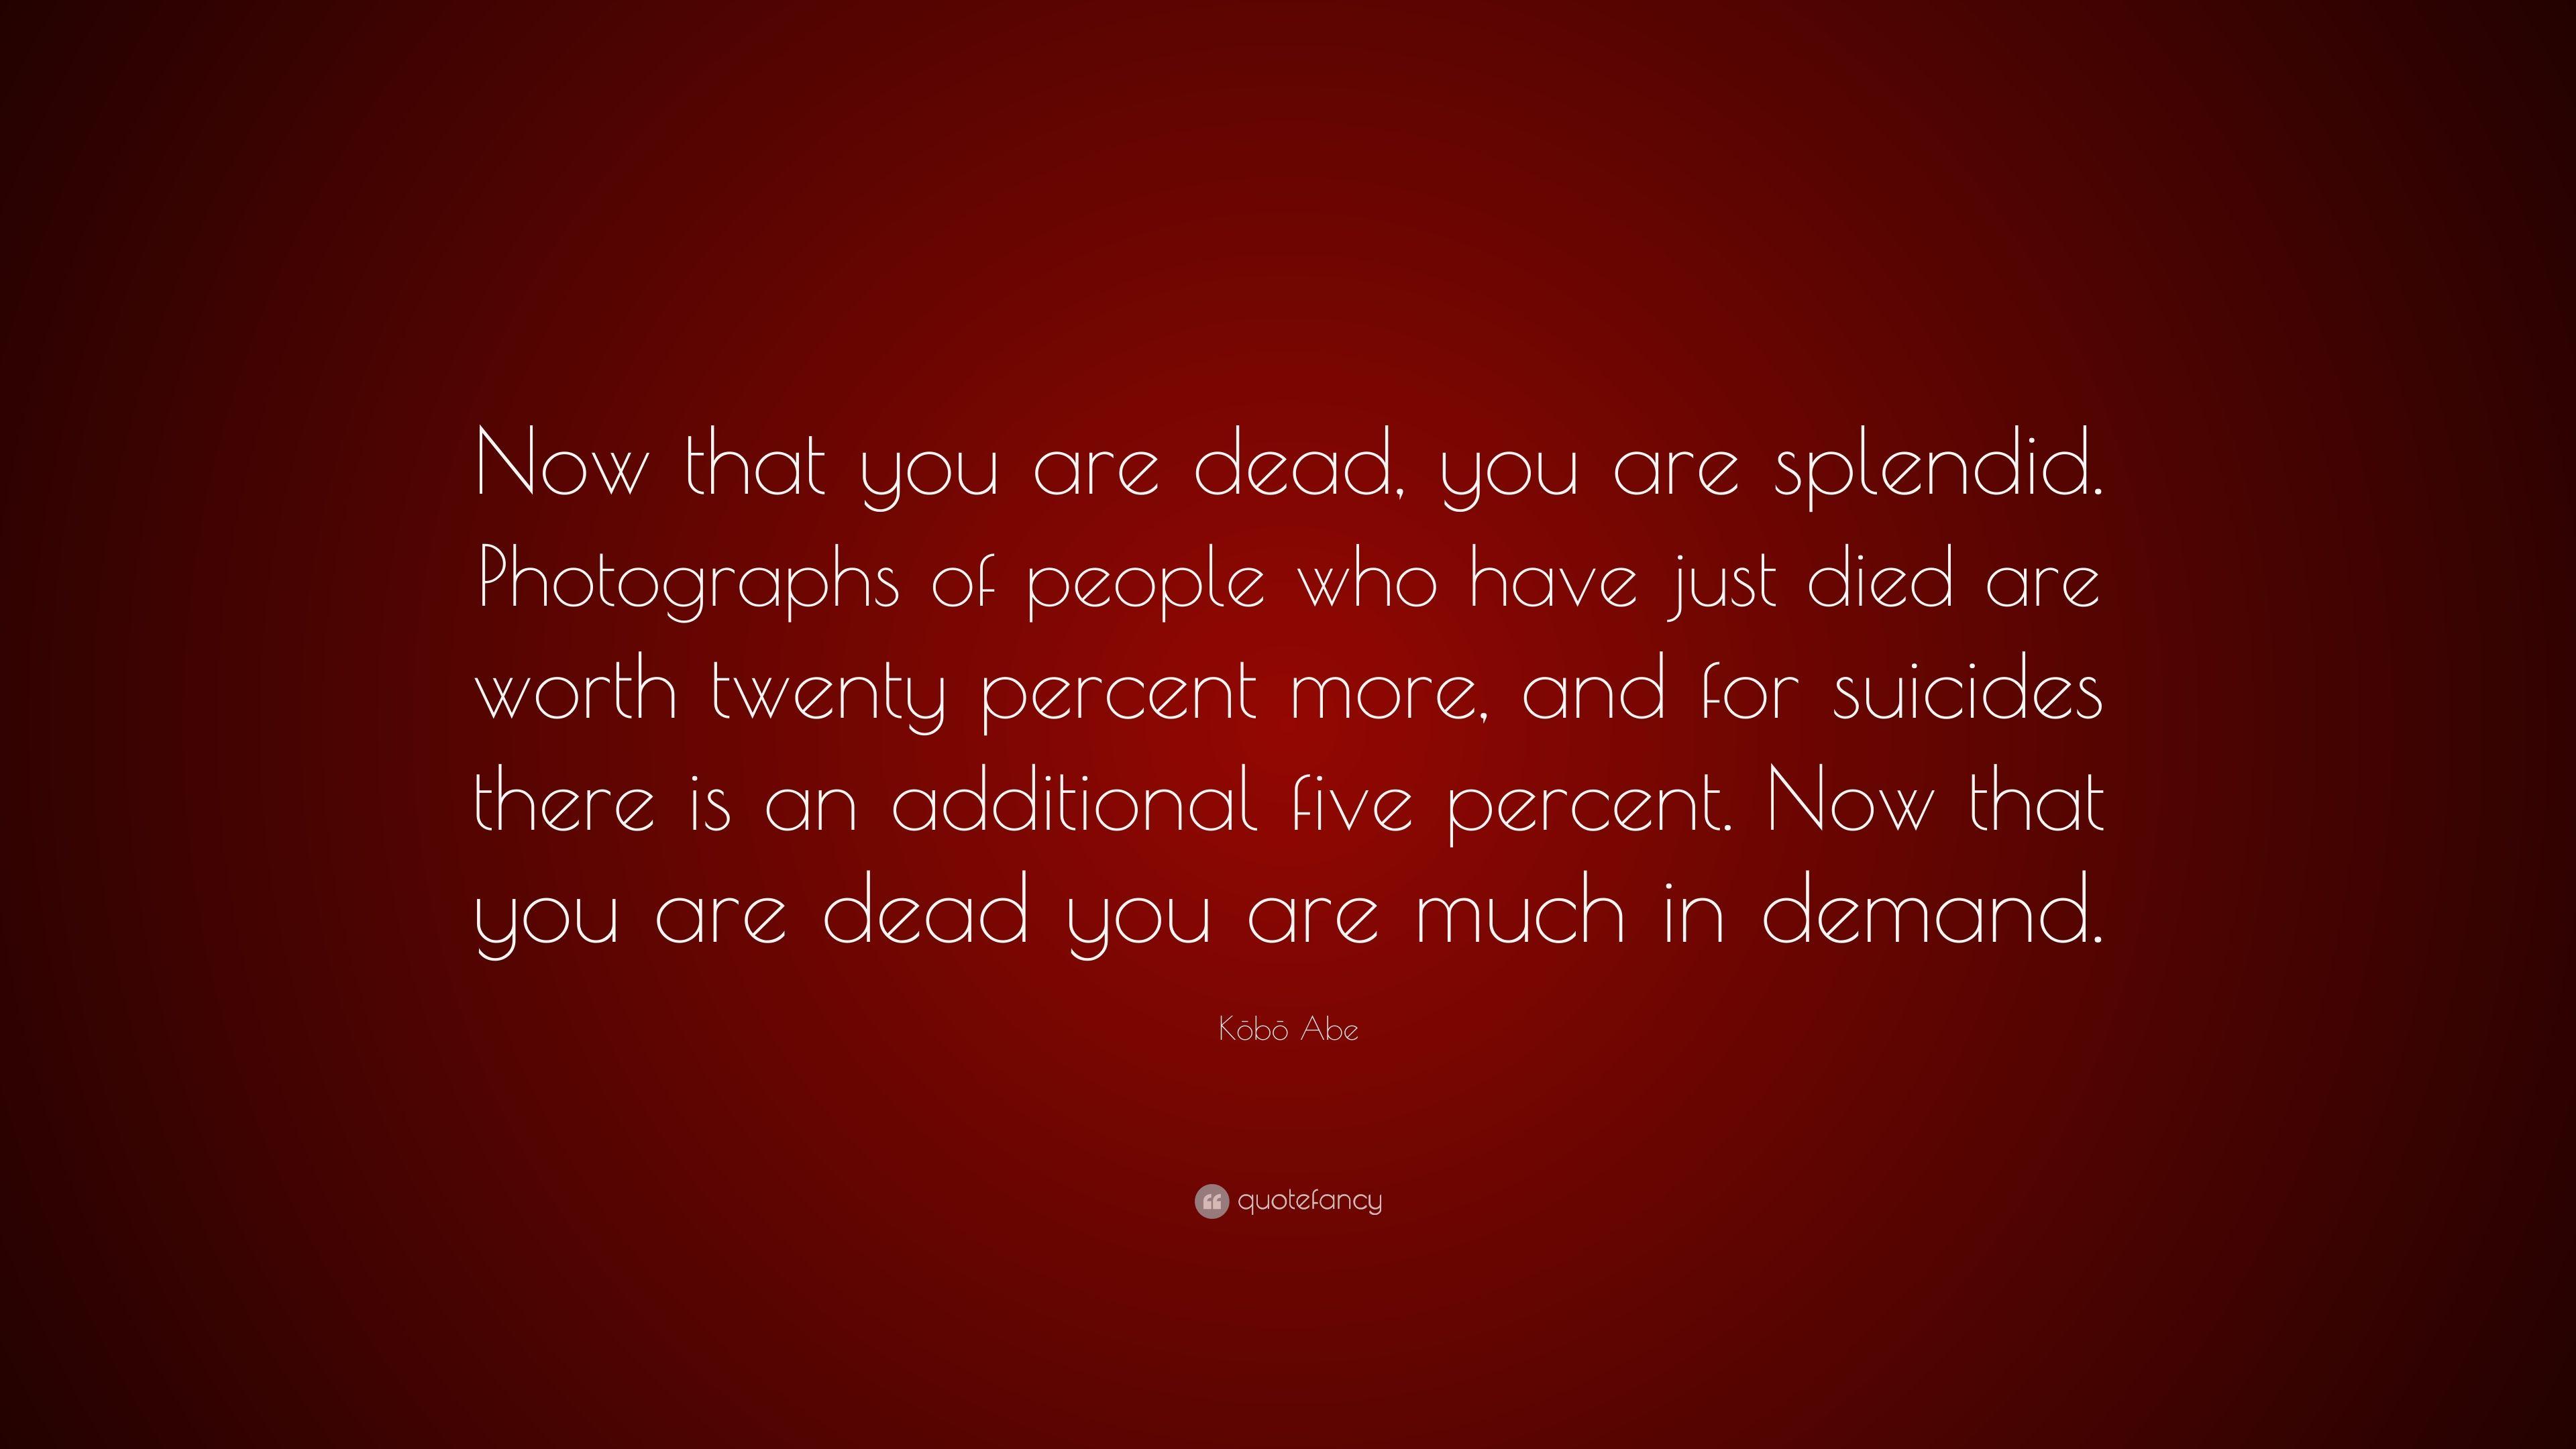 Kōbō Abe Quote: “Now that you are dead, you are splendid